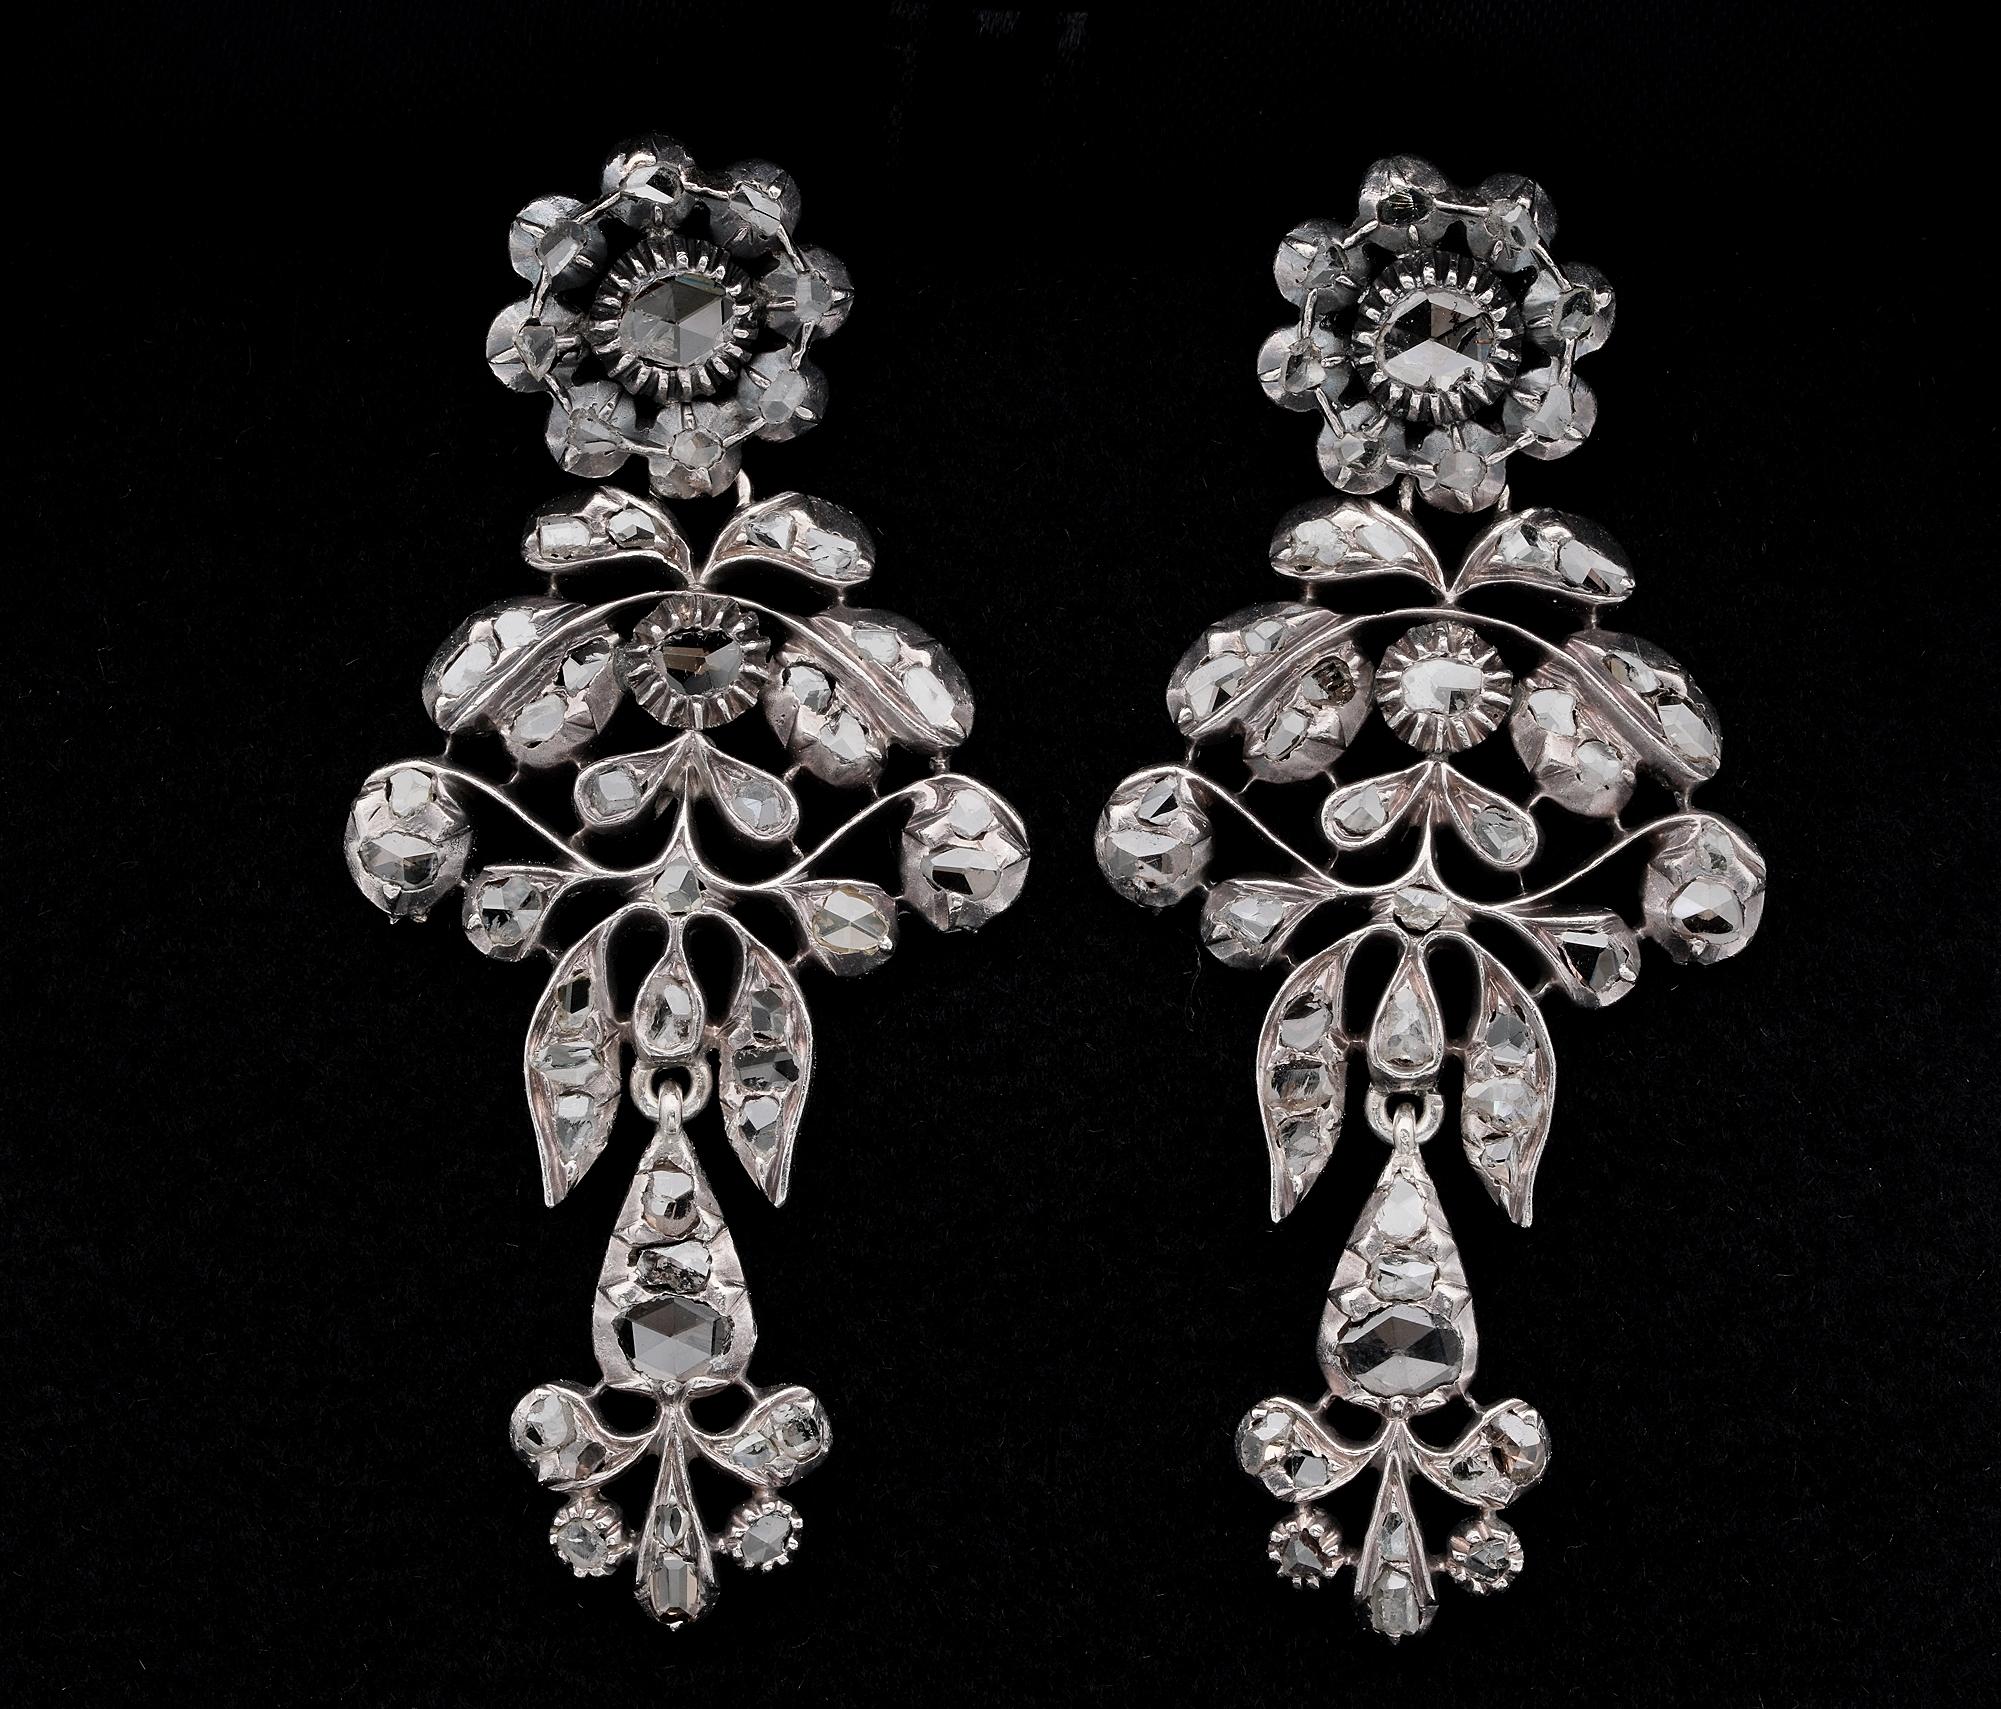 1790 ca.
18 Kt gold topped by silver
Fabulous openwork rococo Giardinetti design suspending from a main flower top, intricately done by the Georgian masters feature a selection of 92 in number rose cut Diamonds giving out that special twinkle at any